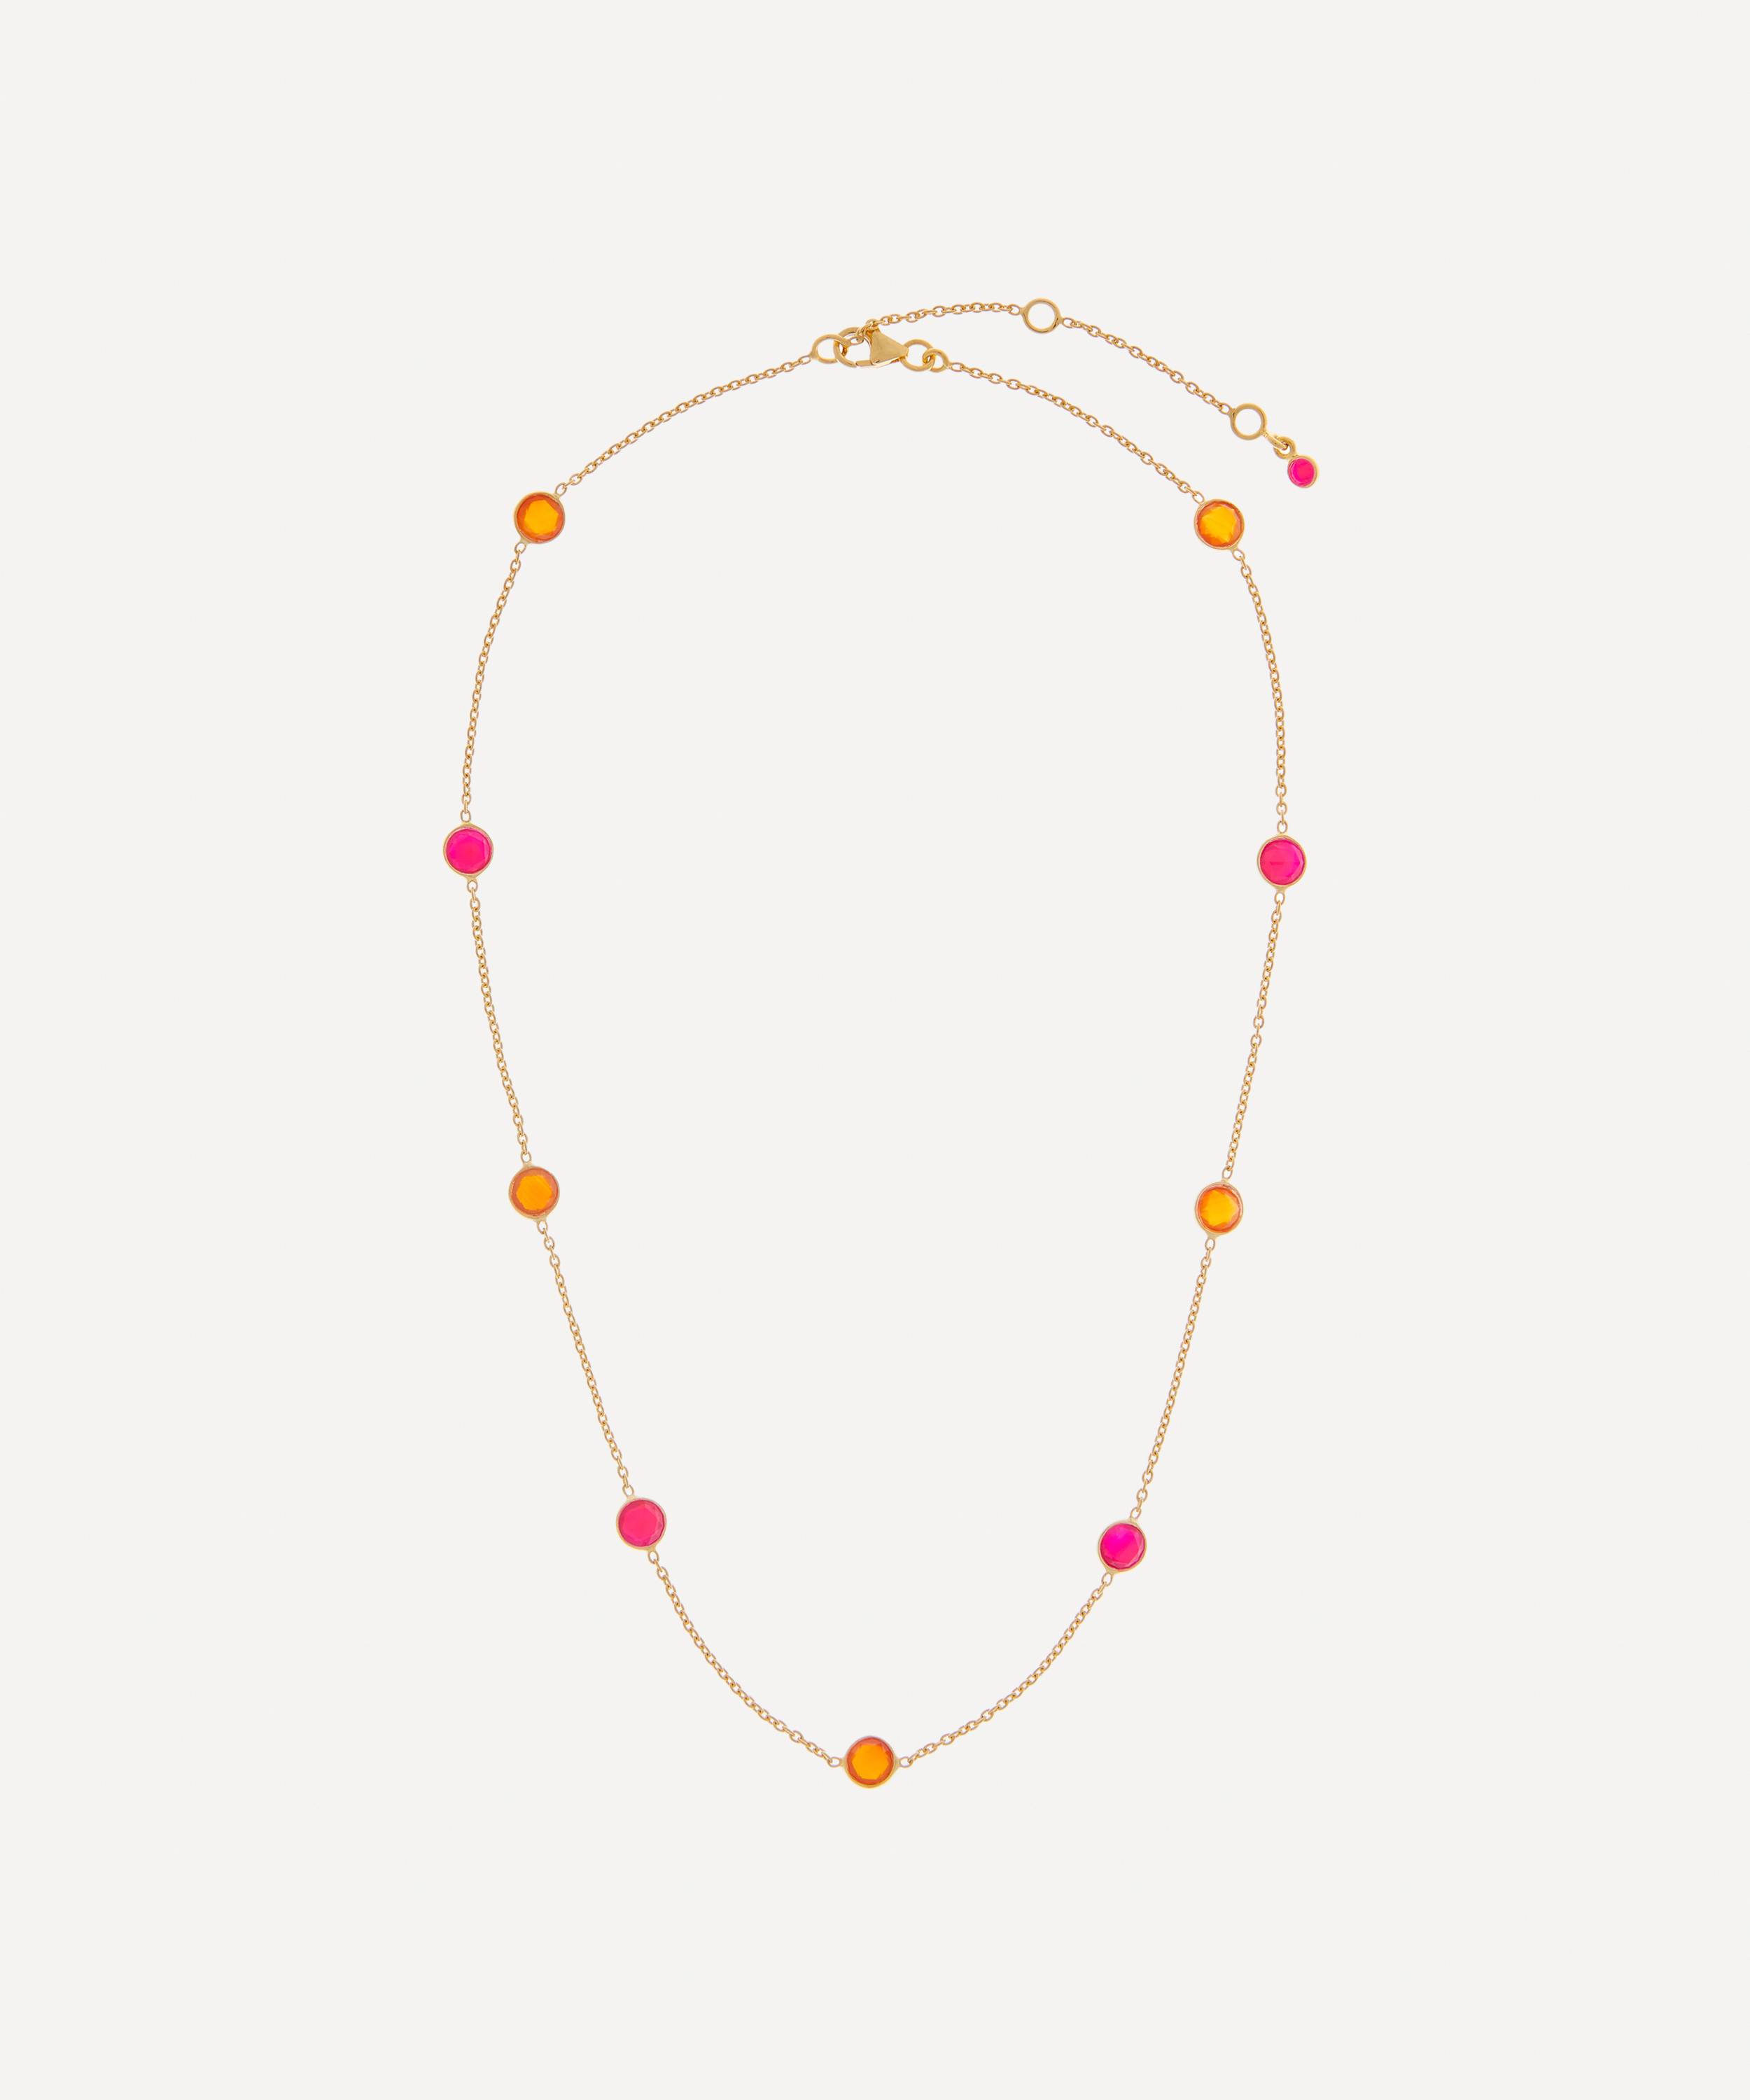 Auree 18ct Gold-Plated Vermeil Silver Antibes and Fuchsia Chalcedony Necklace | Liberty